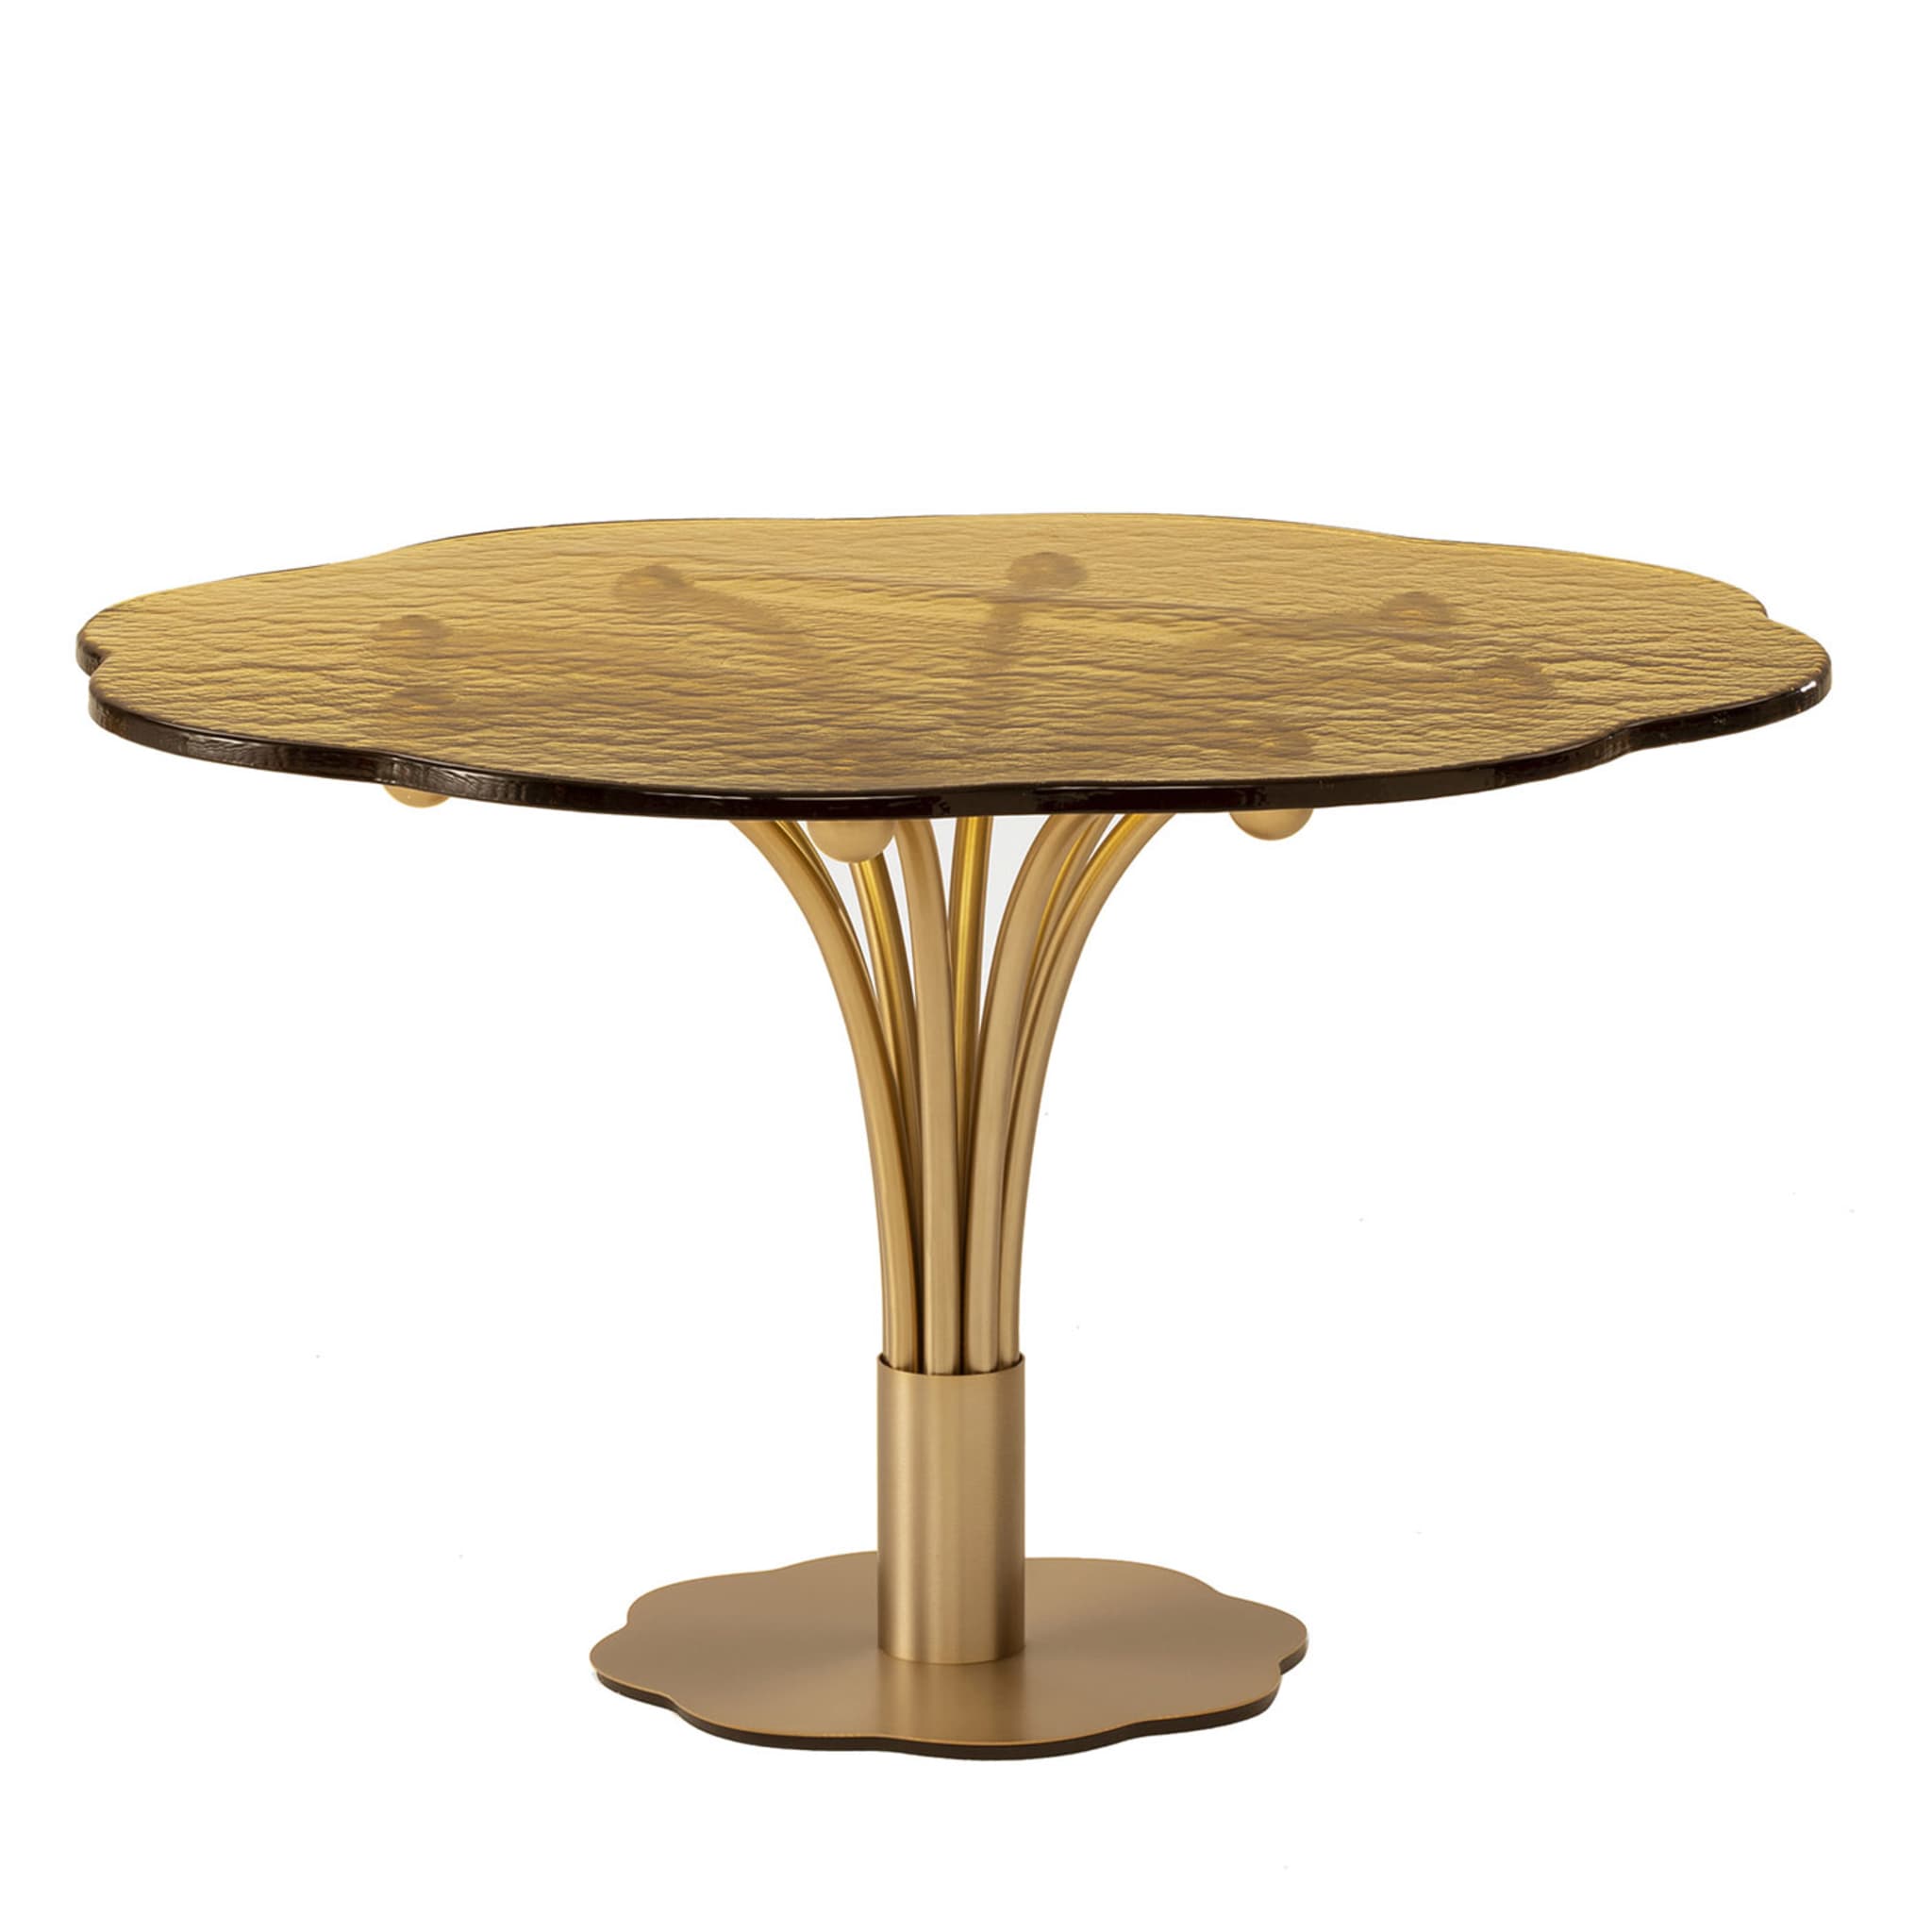 Pistil Dining Table by India Mahdavi - Main view